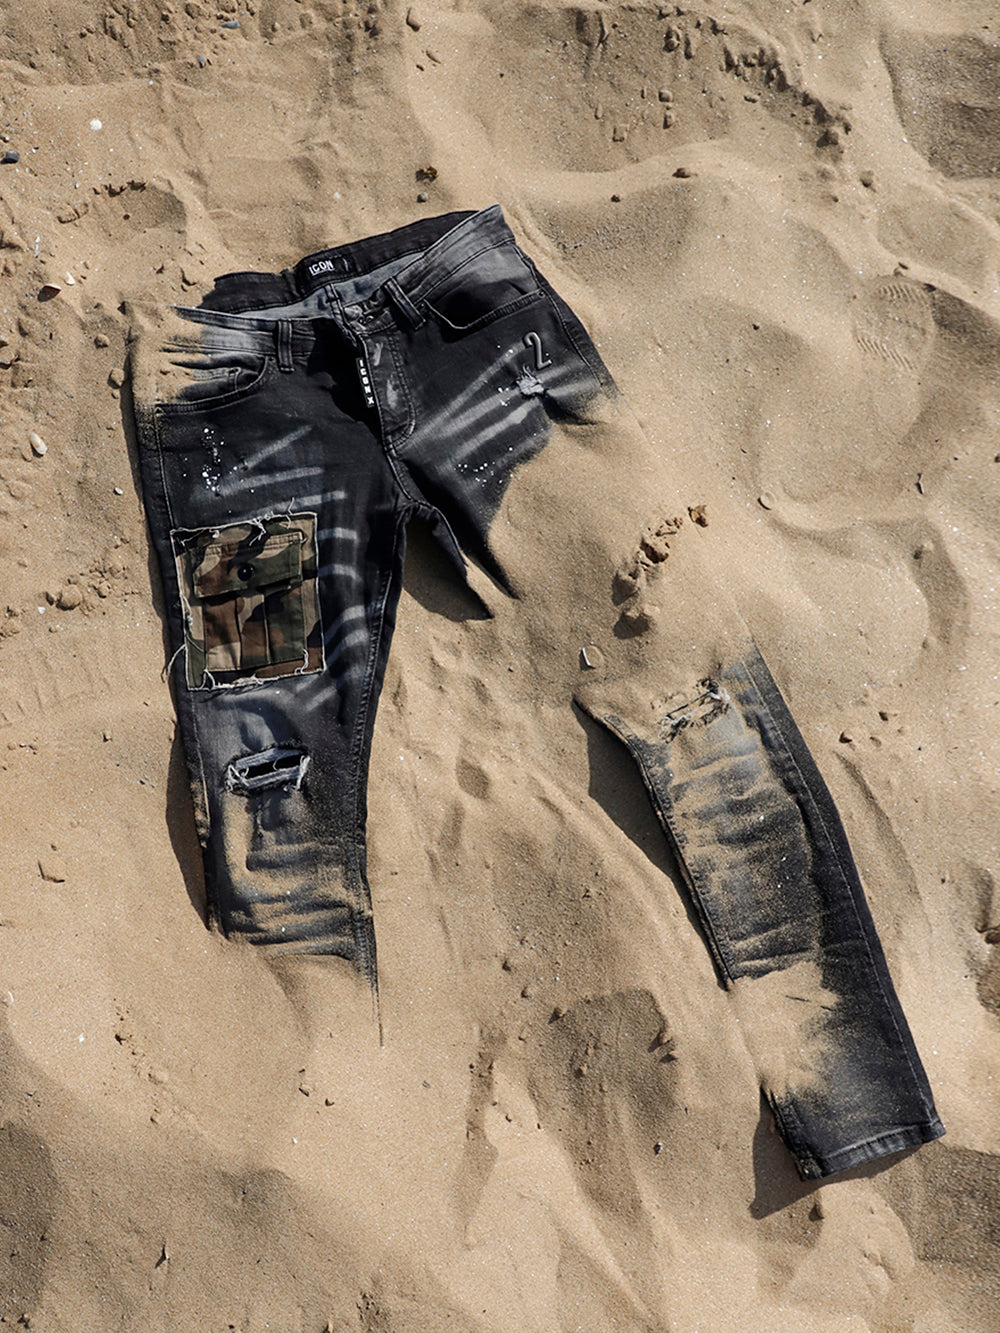 A pair of CAMOUFLAGE | BLACK jeans laying in the sand.